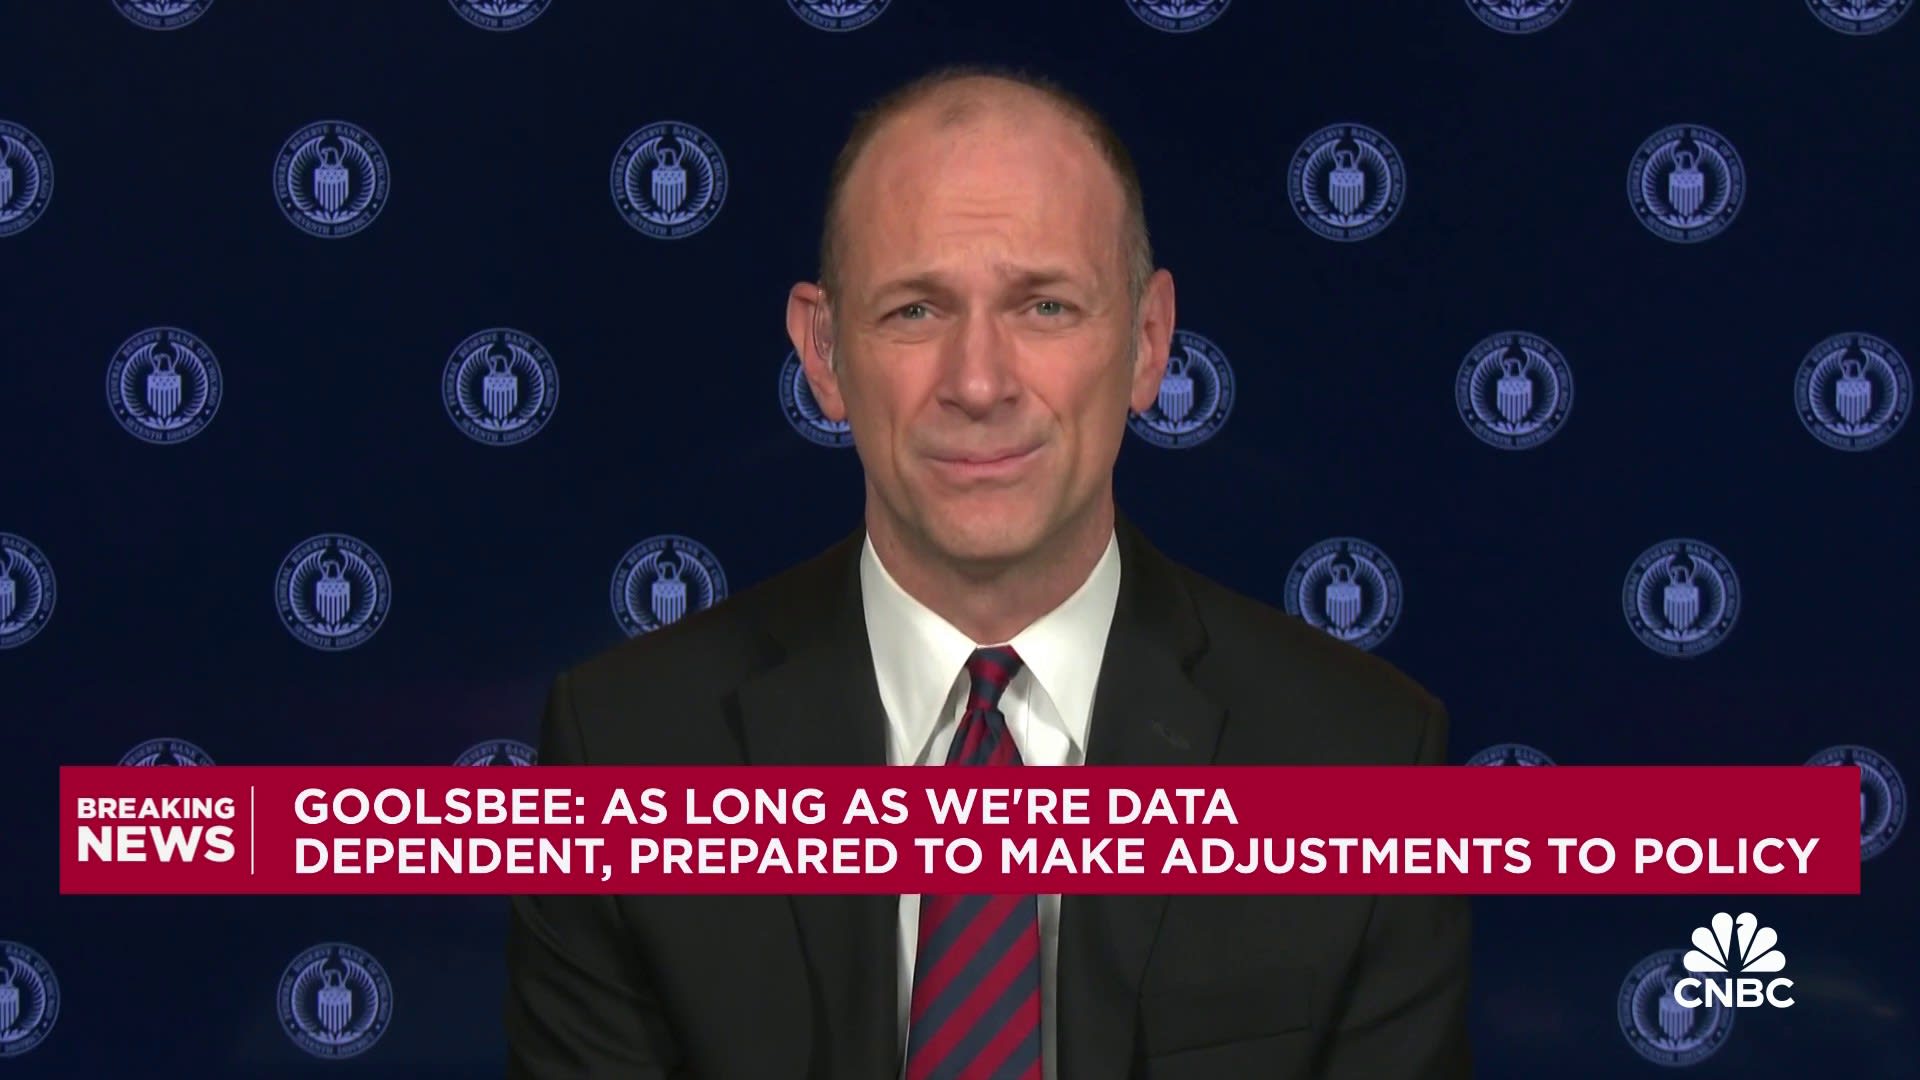 Chicago Fed President Austan Goolsbee: We've seen significant improvement on the inflaiton front